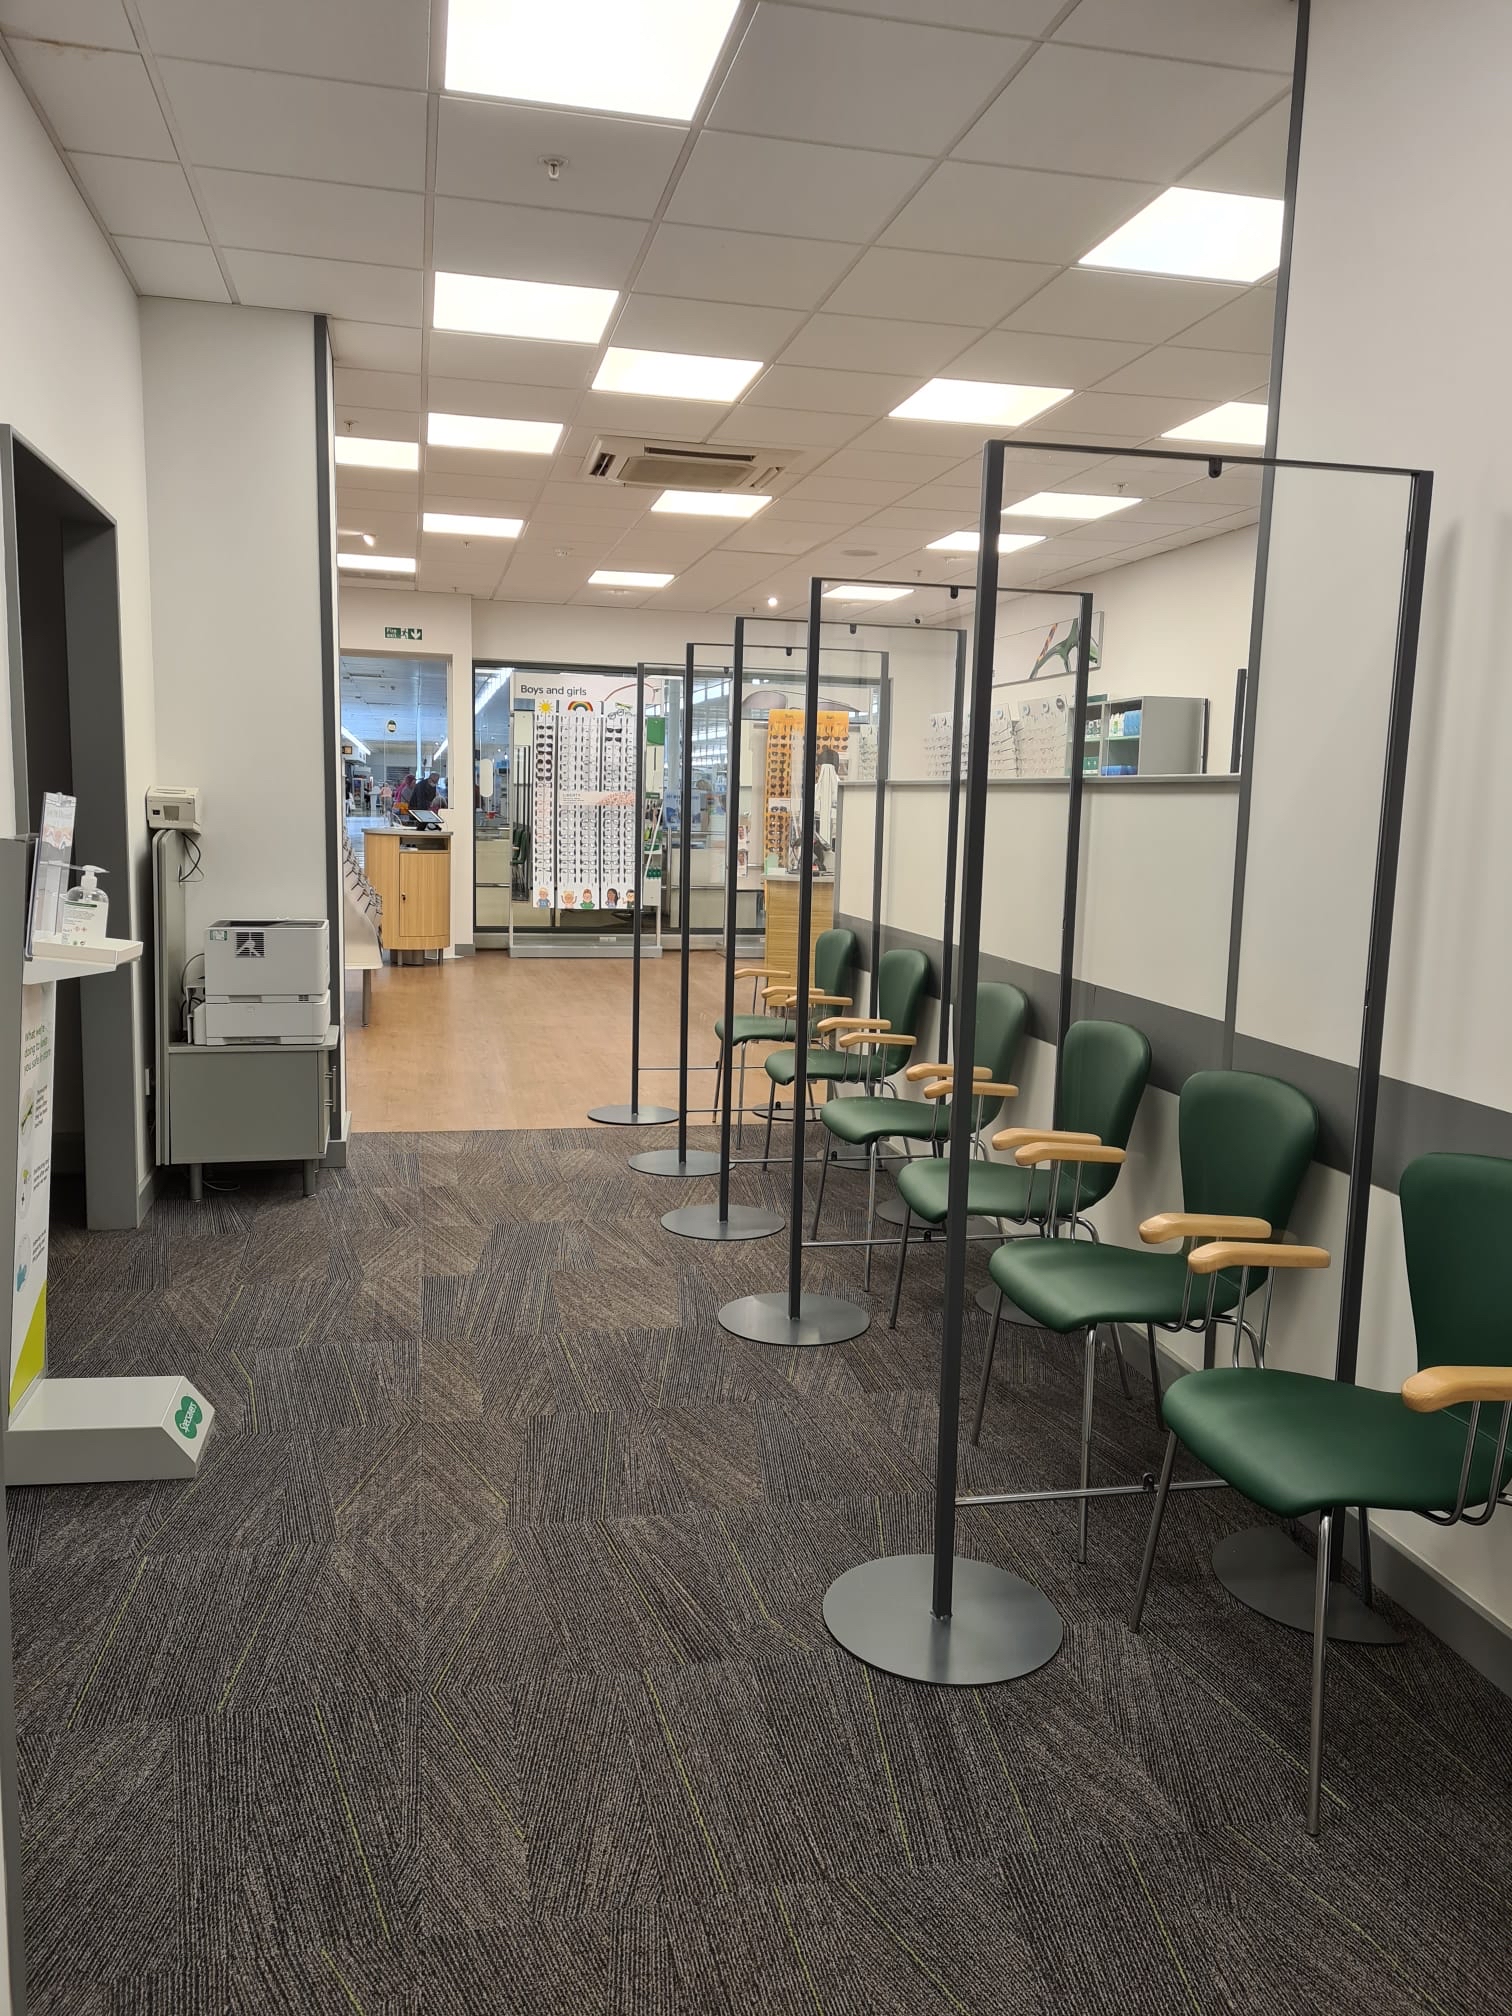 Images Specsavers Opticians and Audiologists - Fosse Park Sainsbury's